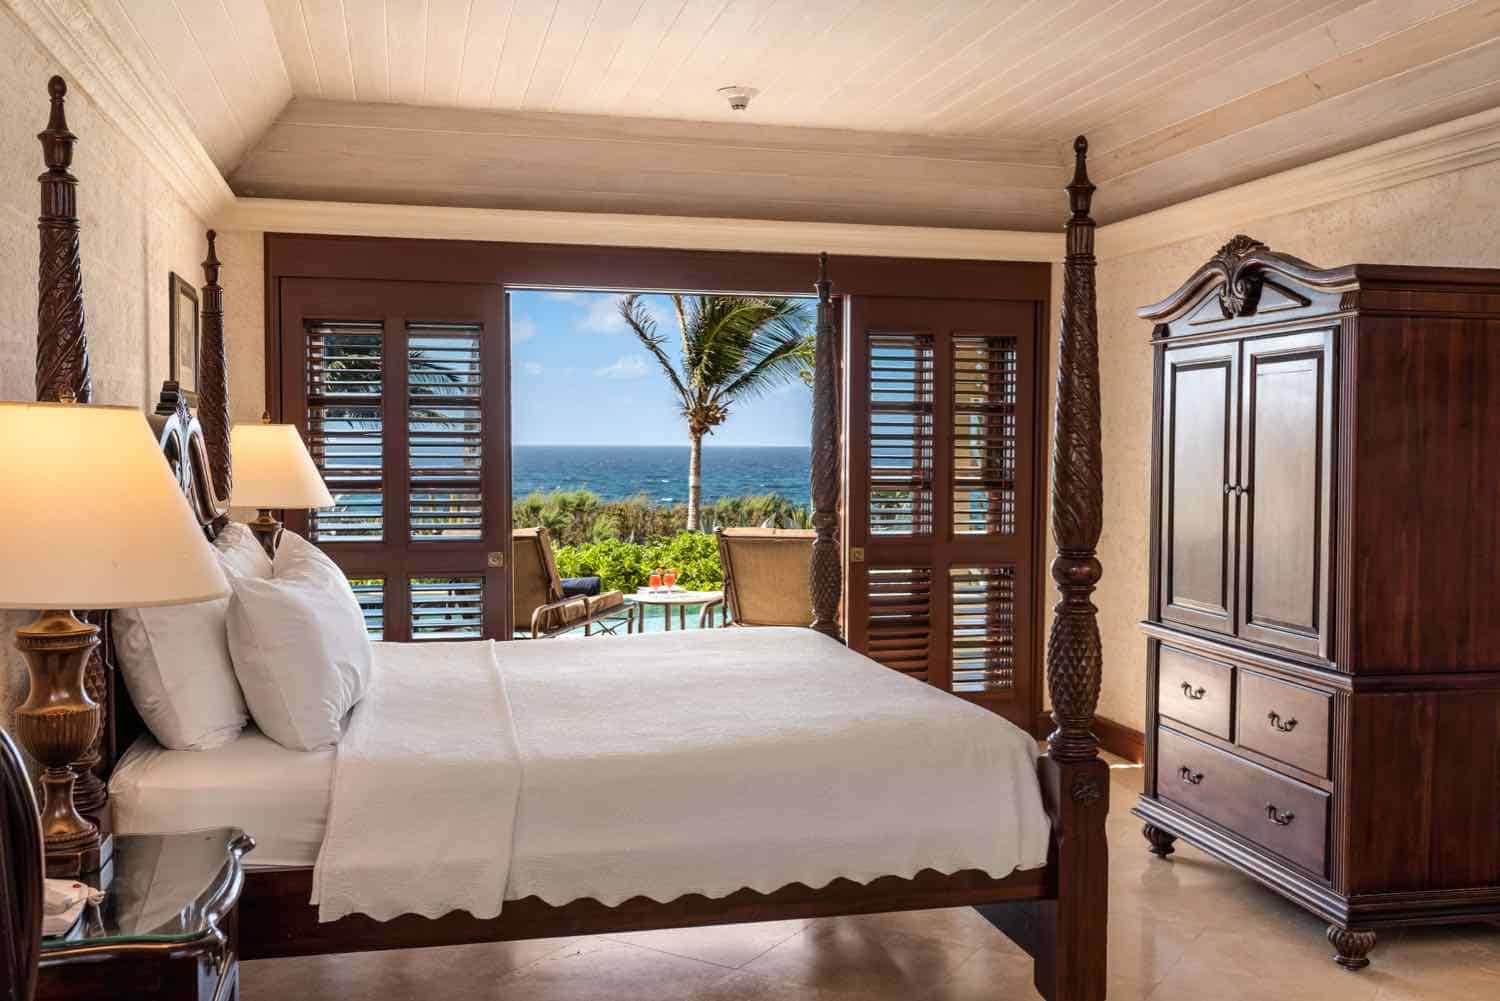 four poster bed with a sea view